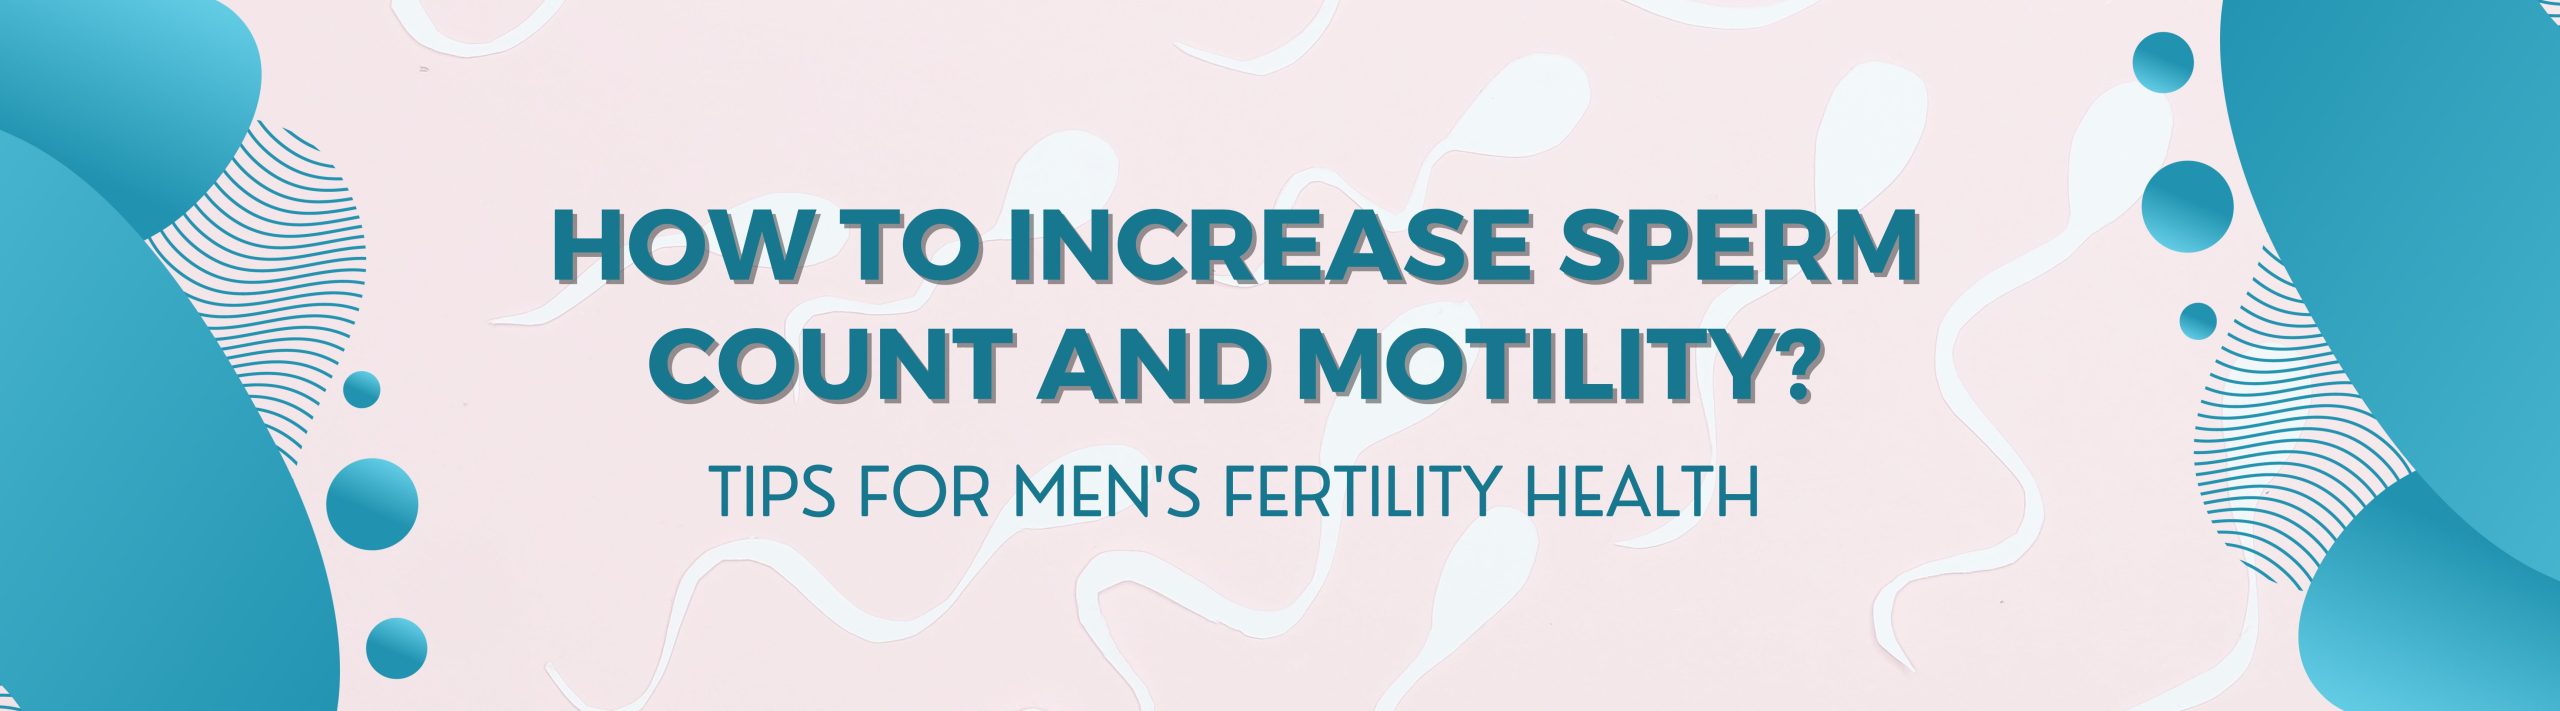 How to Increase Sperm Count and Motility?